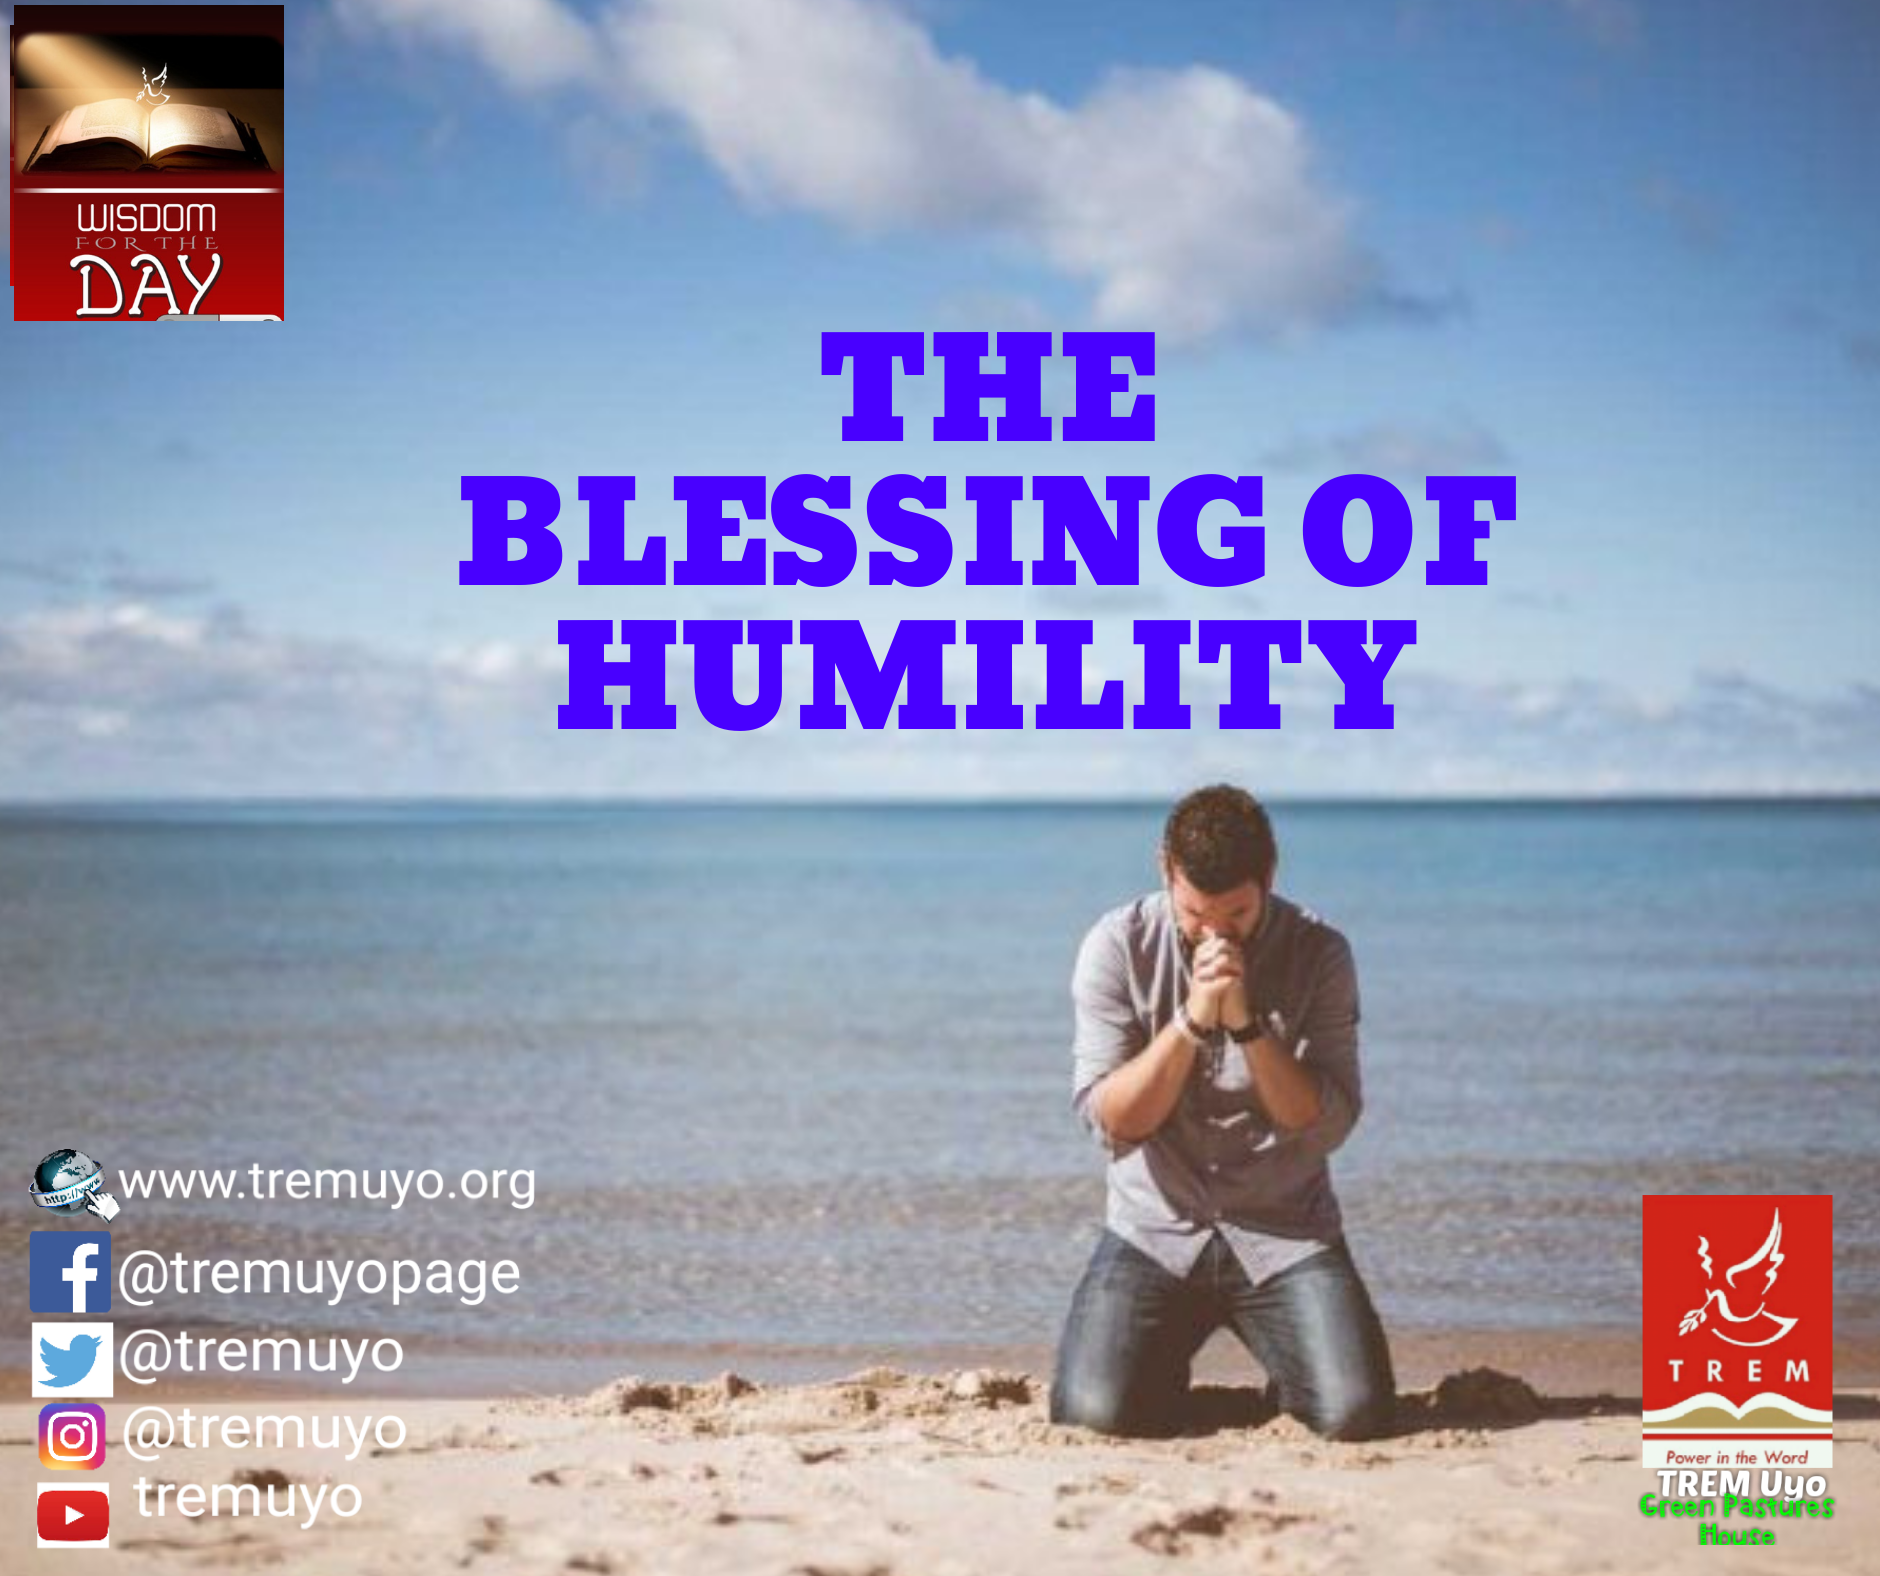 THE BLESSING OF HUMILITY